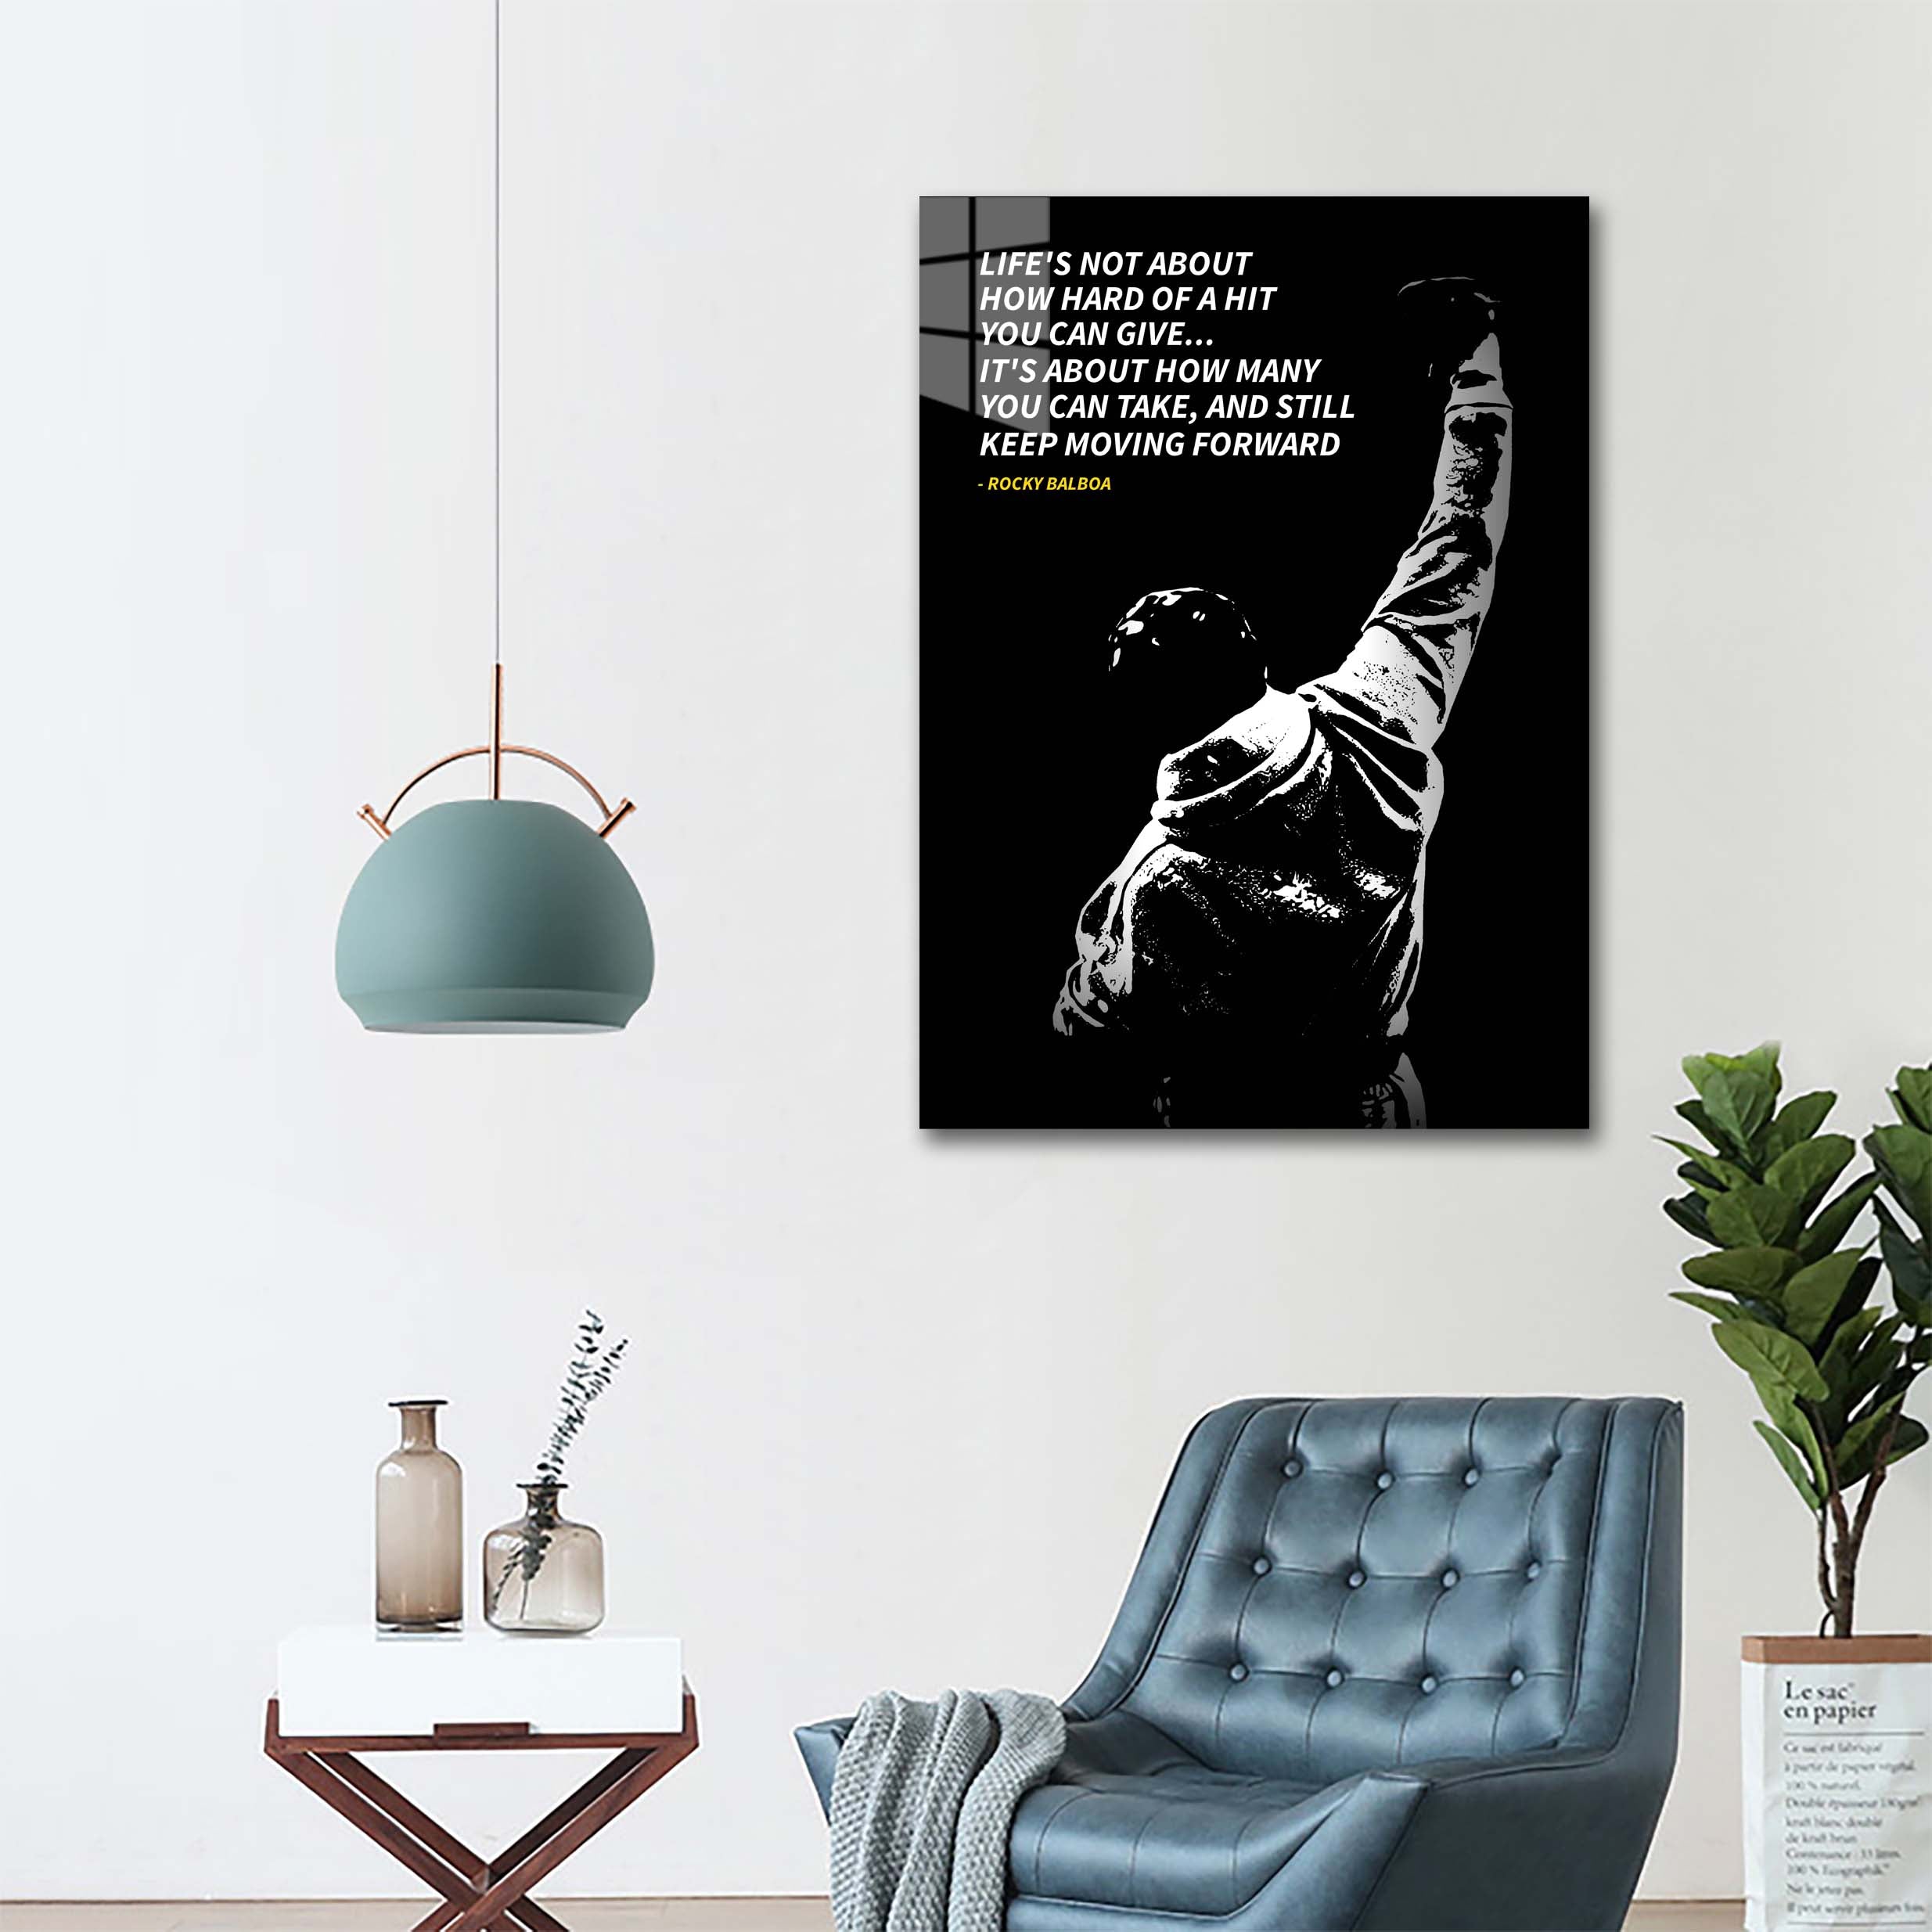 Rocky Balboa quotes  -designed by @Dayo Art